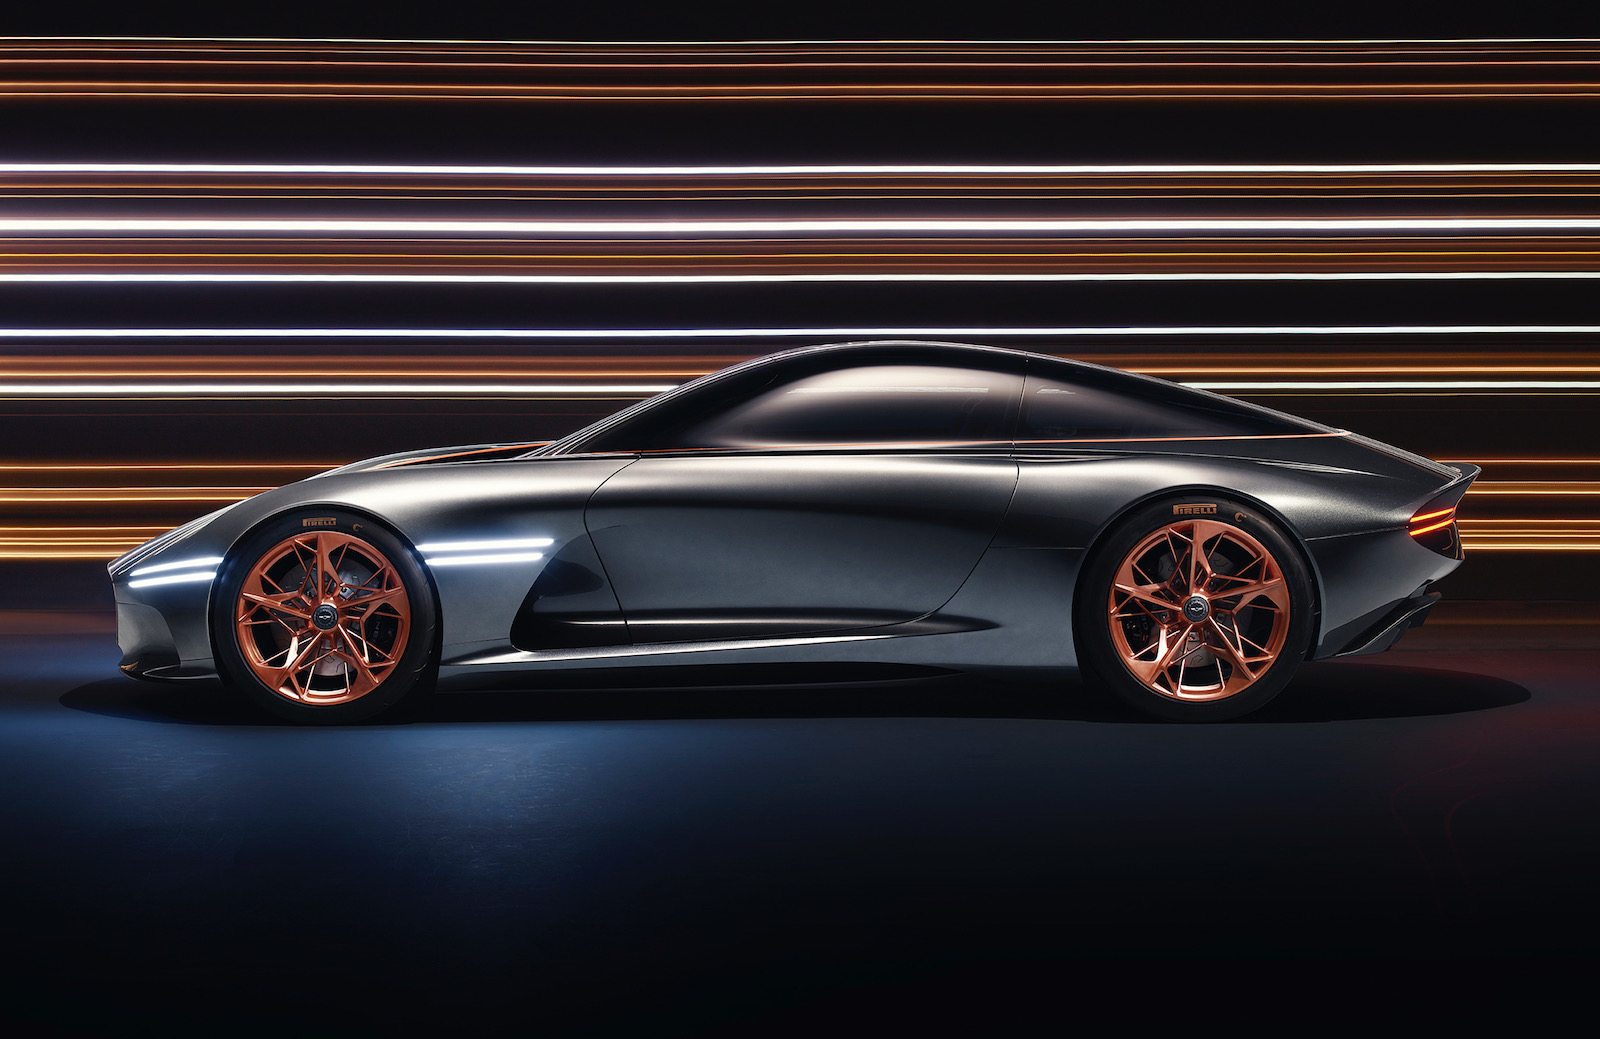 Stunning Genesis Essentia concept could preview new GT road car